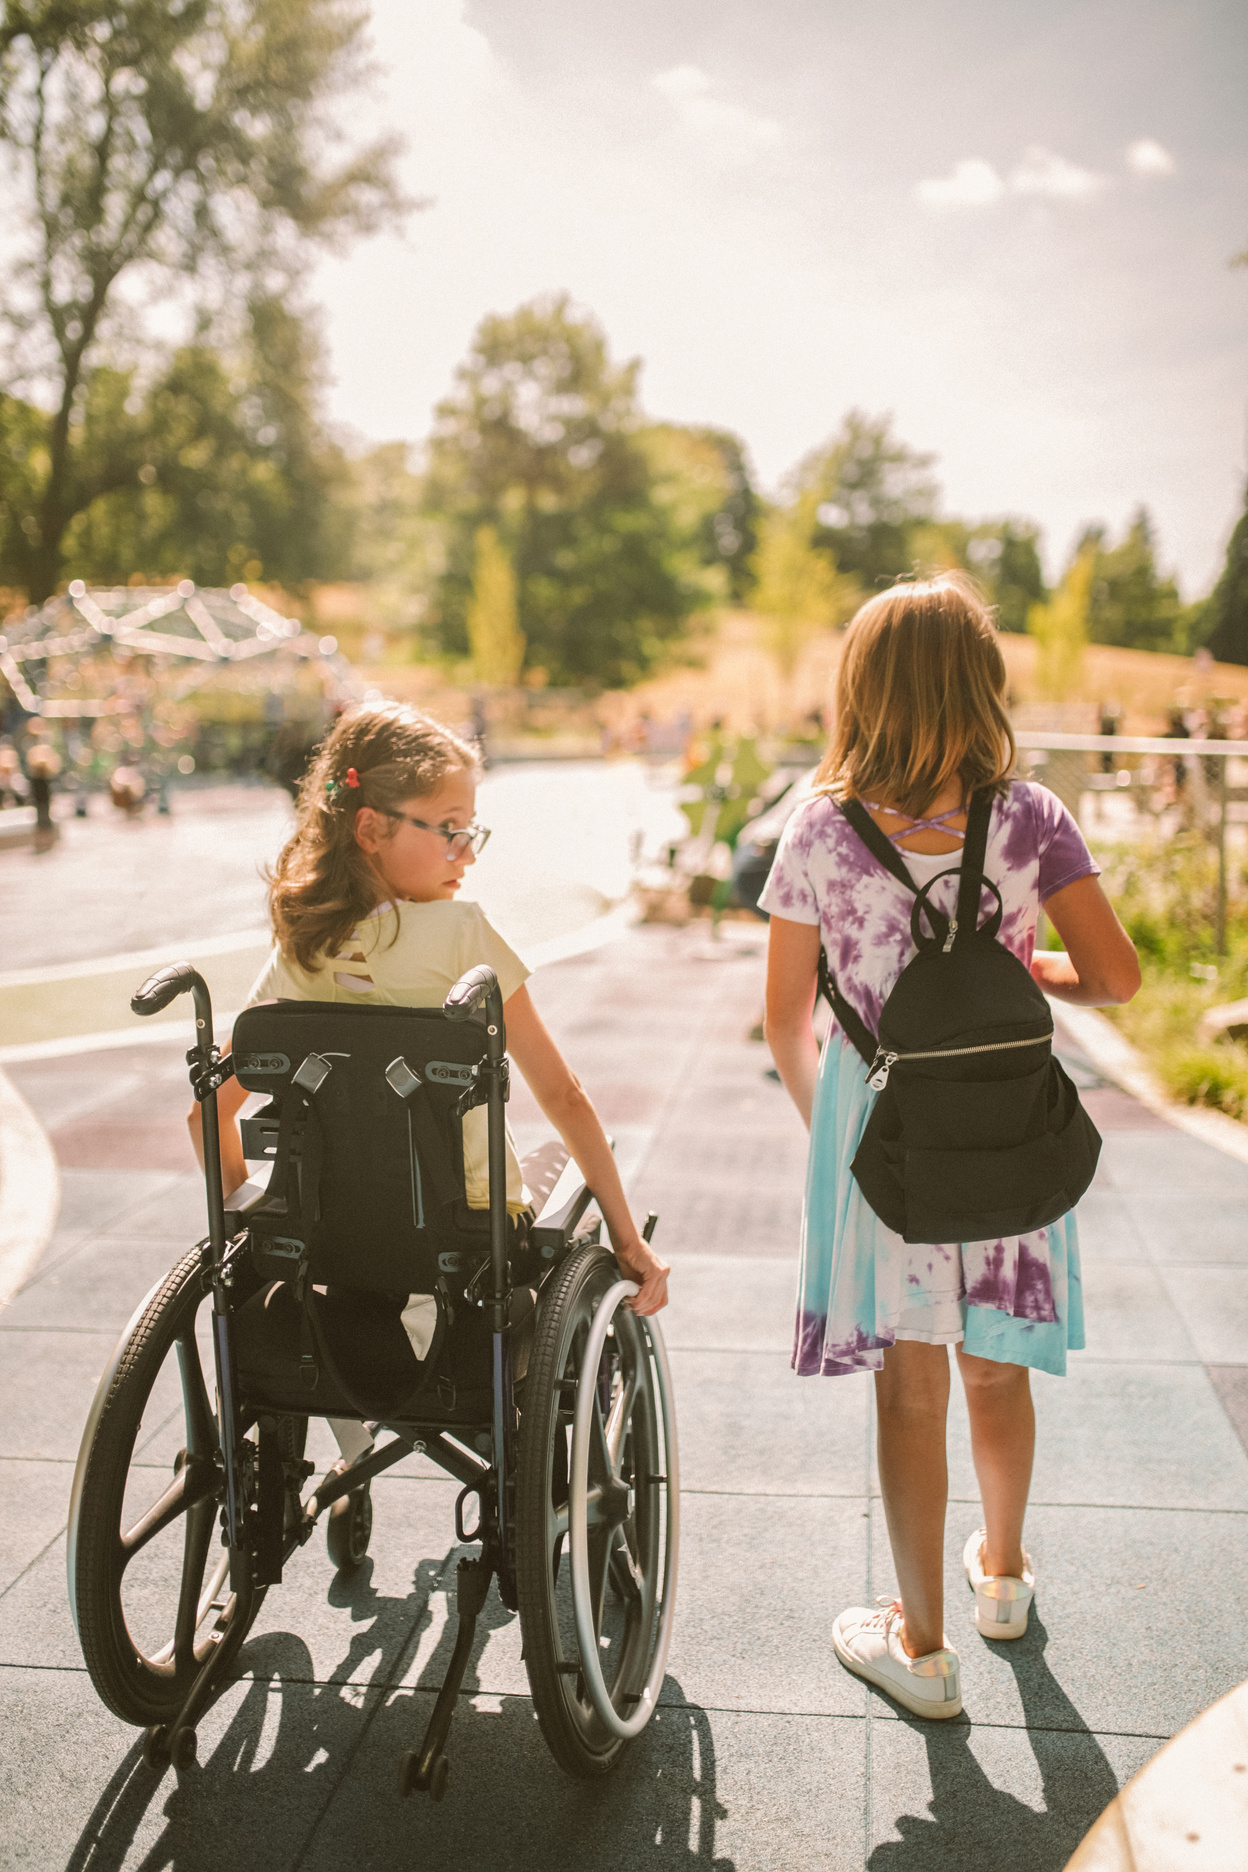 Parks and Rec Child in Wheelchair and Girl Outdoors